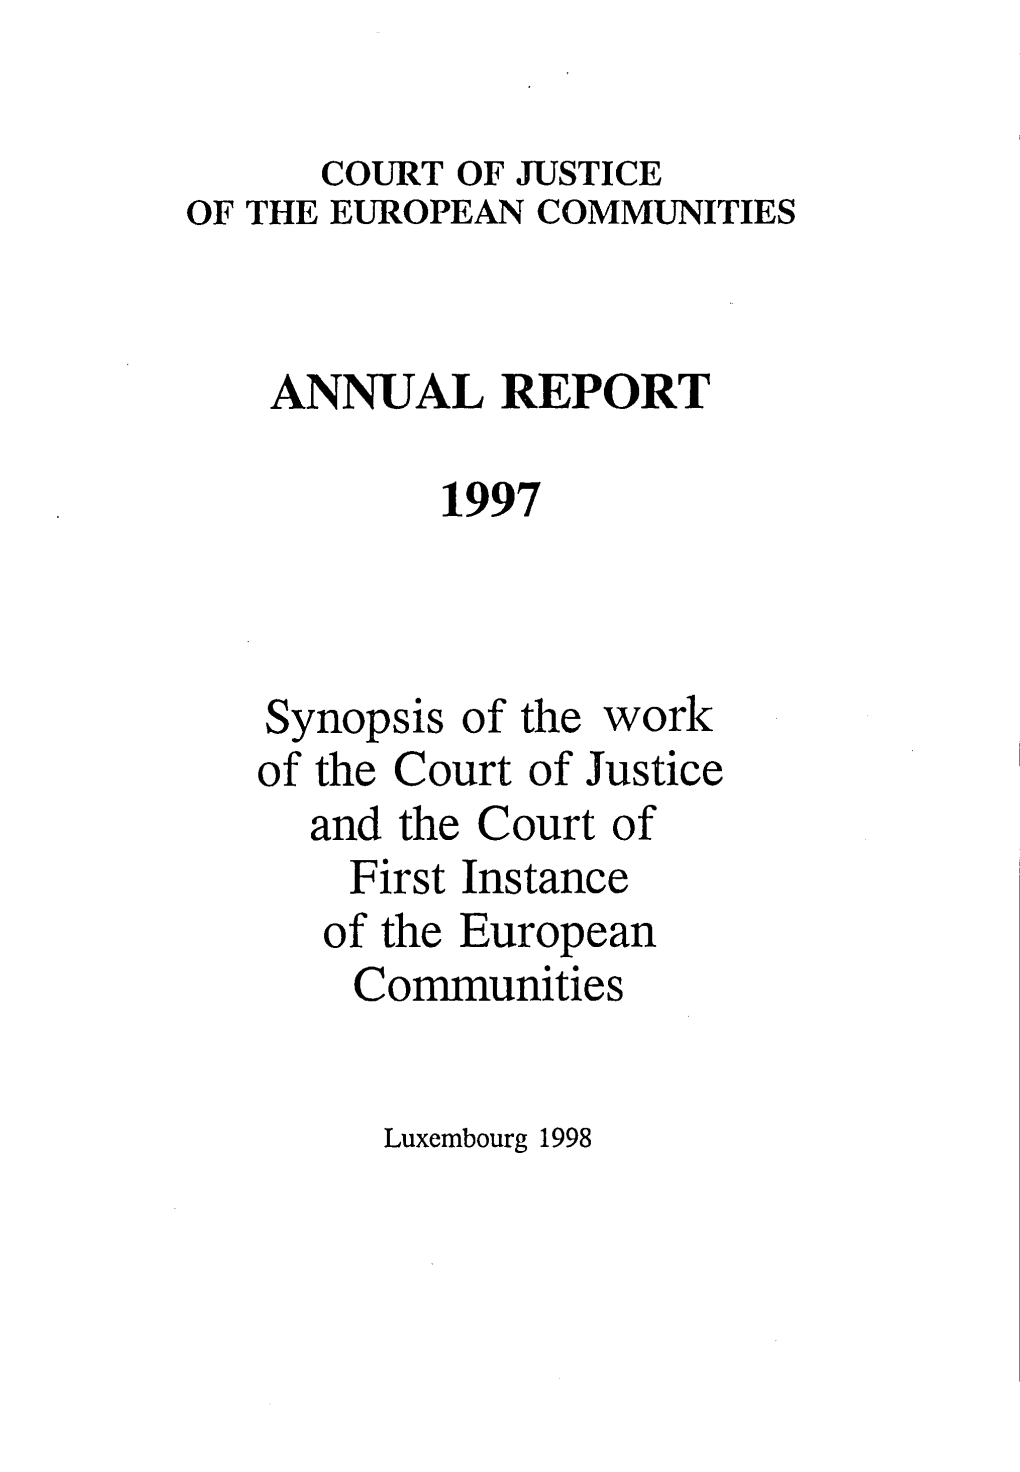 ANNUAL REPORT Synopsis of the Worl&lt;: of the Court of Justice and the Court of First Instance of the European Communities